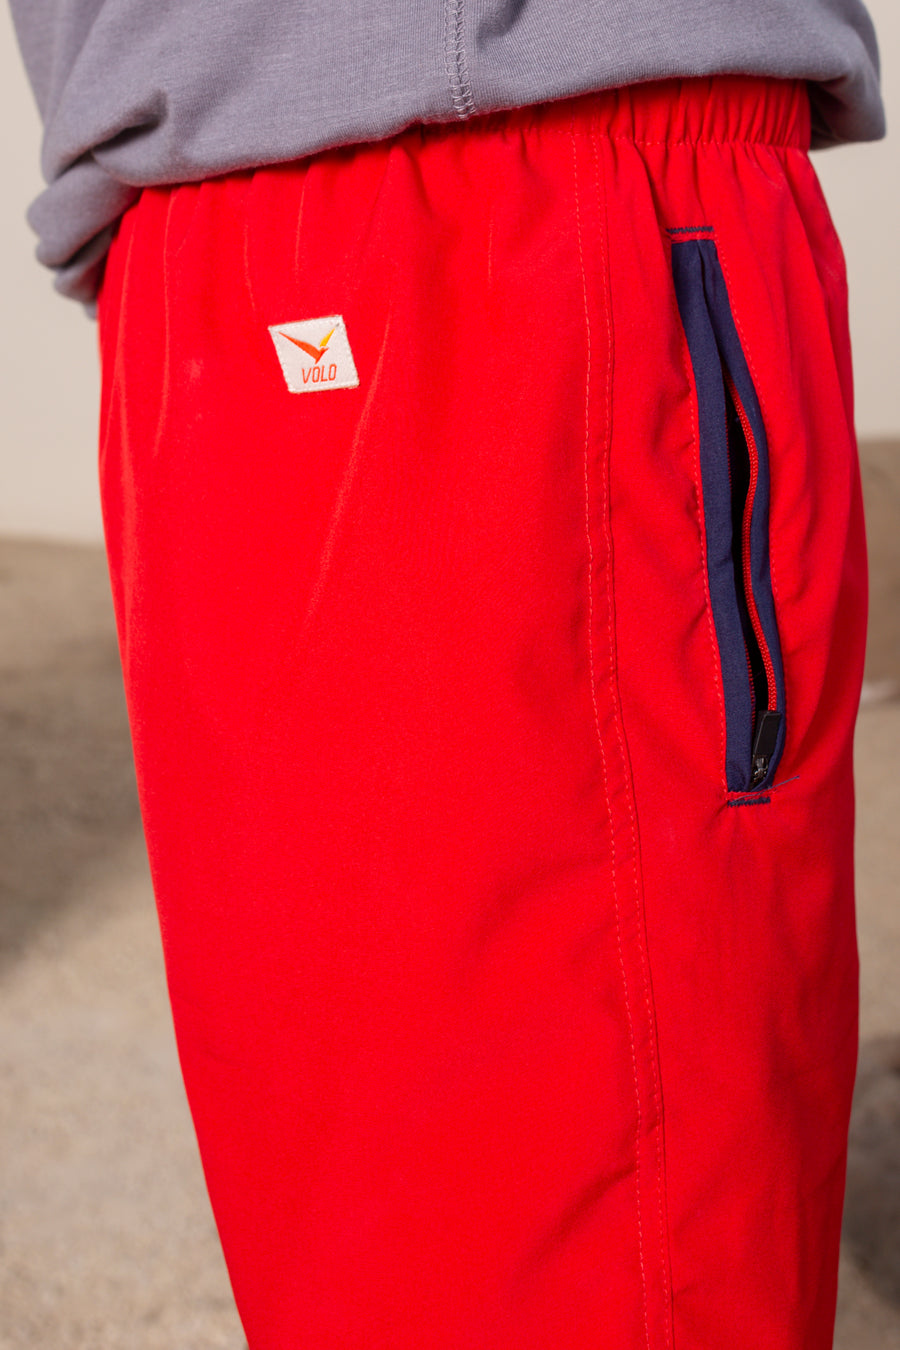 Men's Flight Shorts in Red | VOLO Apparel | Designed so you can feel fly and completely secure, the Flight Shorts 2.0 are made with an ultralight micro stretch fabric that is quick drying and comes with a three zipper pocket design. The smart pocket tech makes it so your stuff won’t bounce when you do. Reinforced stitching so it can handle everything you will throw at it. The one short for your every adventure.